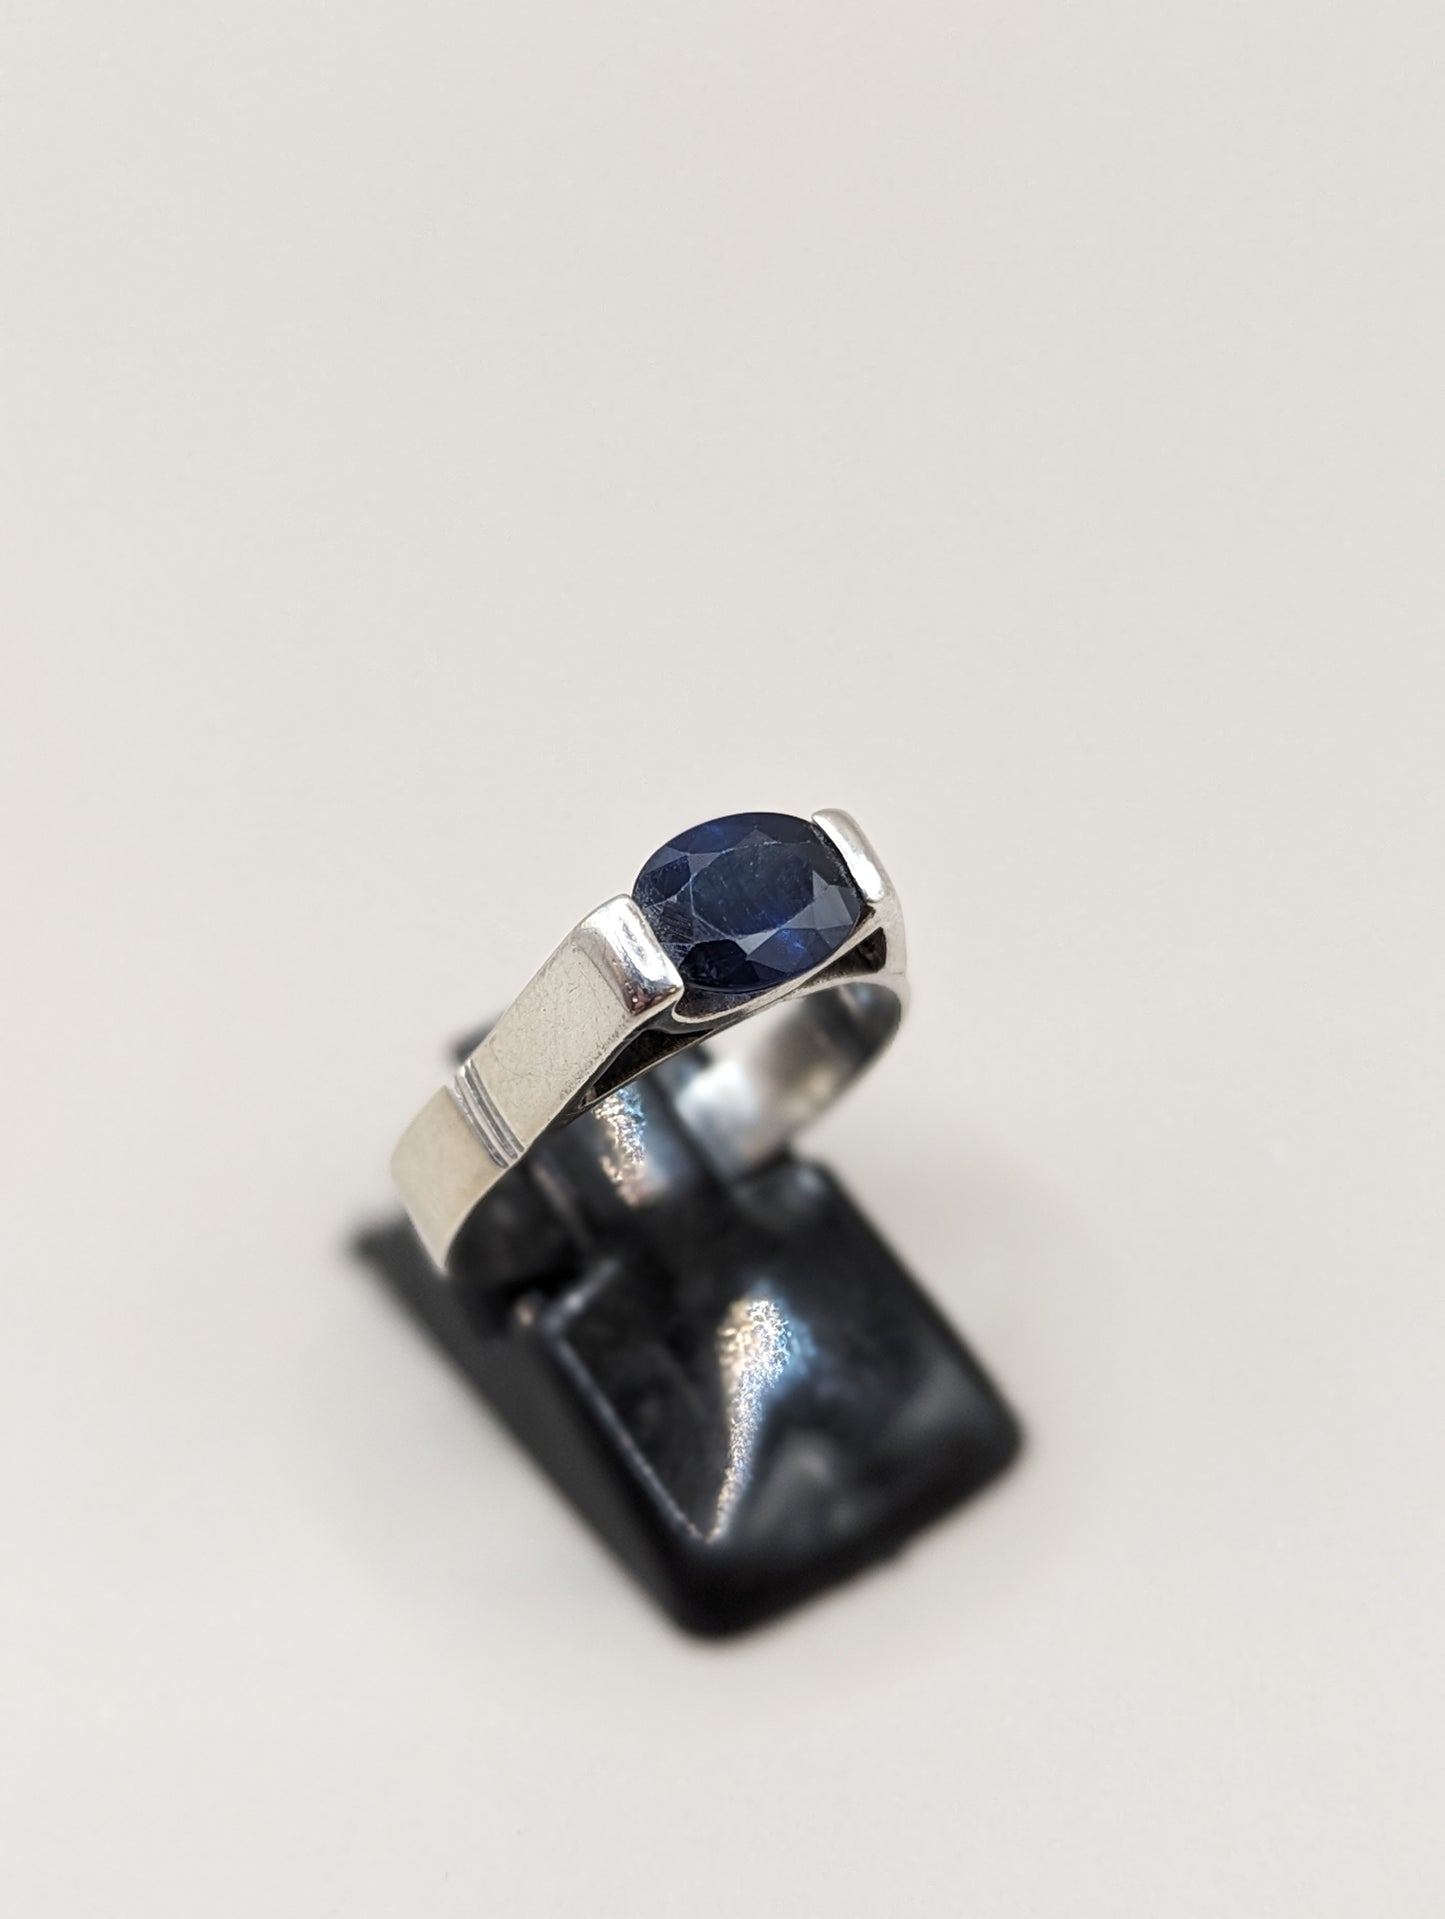 Vintage Sterling Silver Ring with Blue Stone, UK Size P1/2